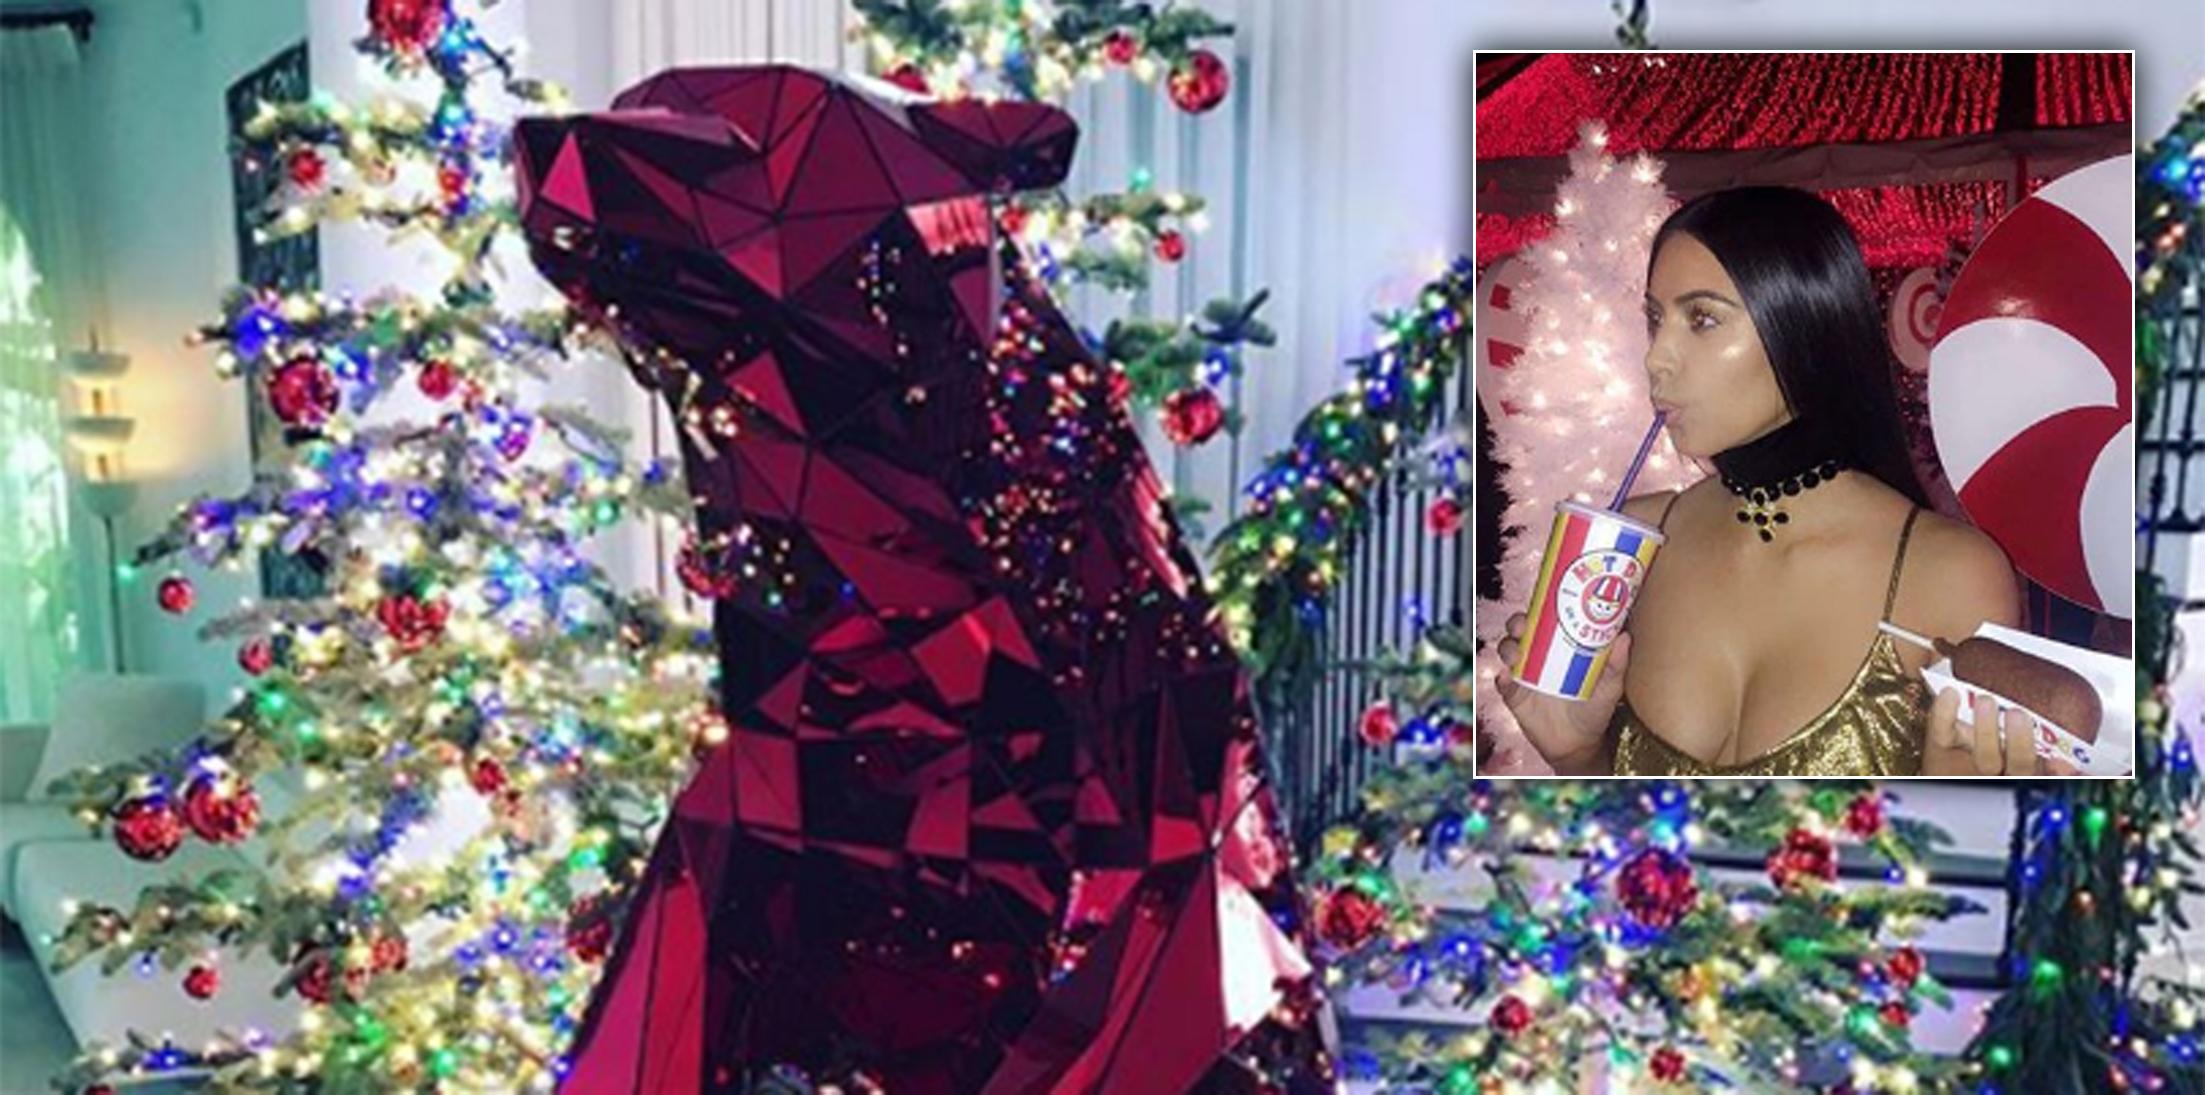 A Kardashian Christmas! Here's How They Celebrate The Holidays